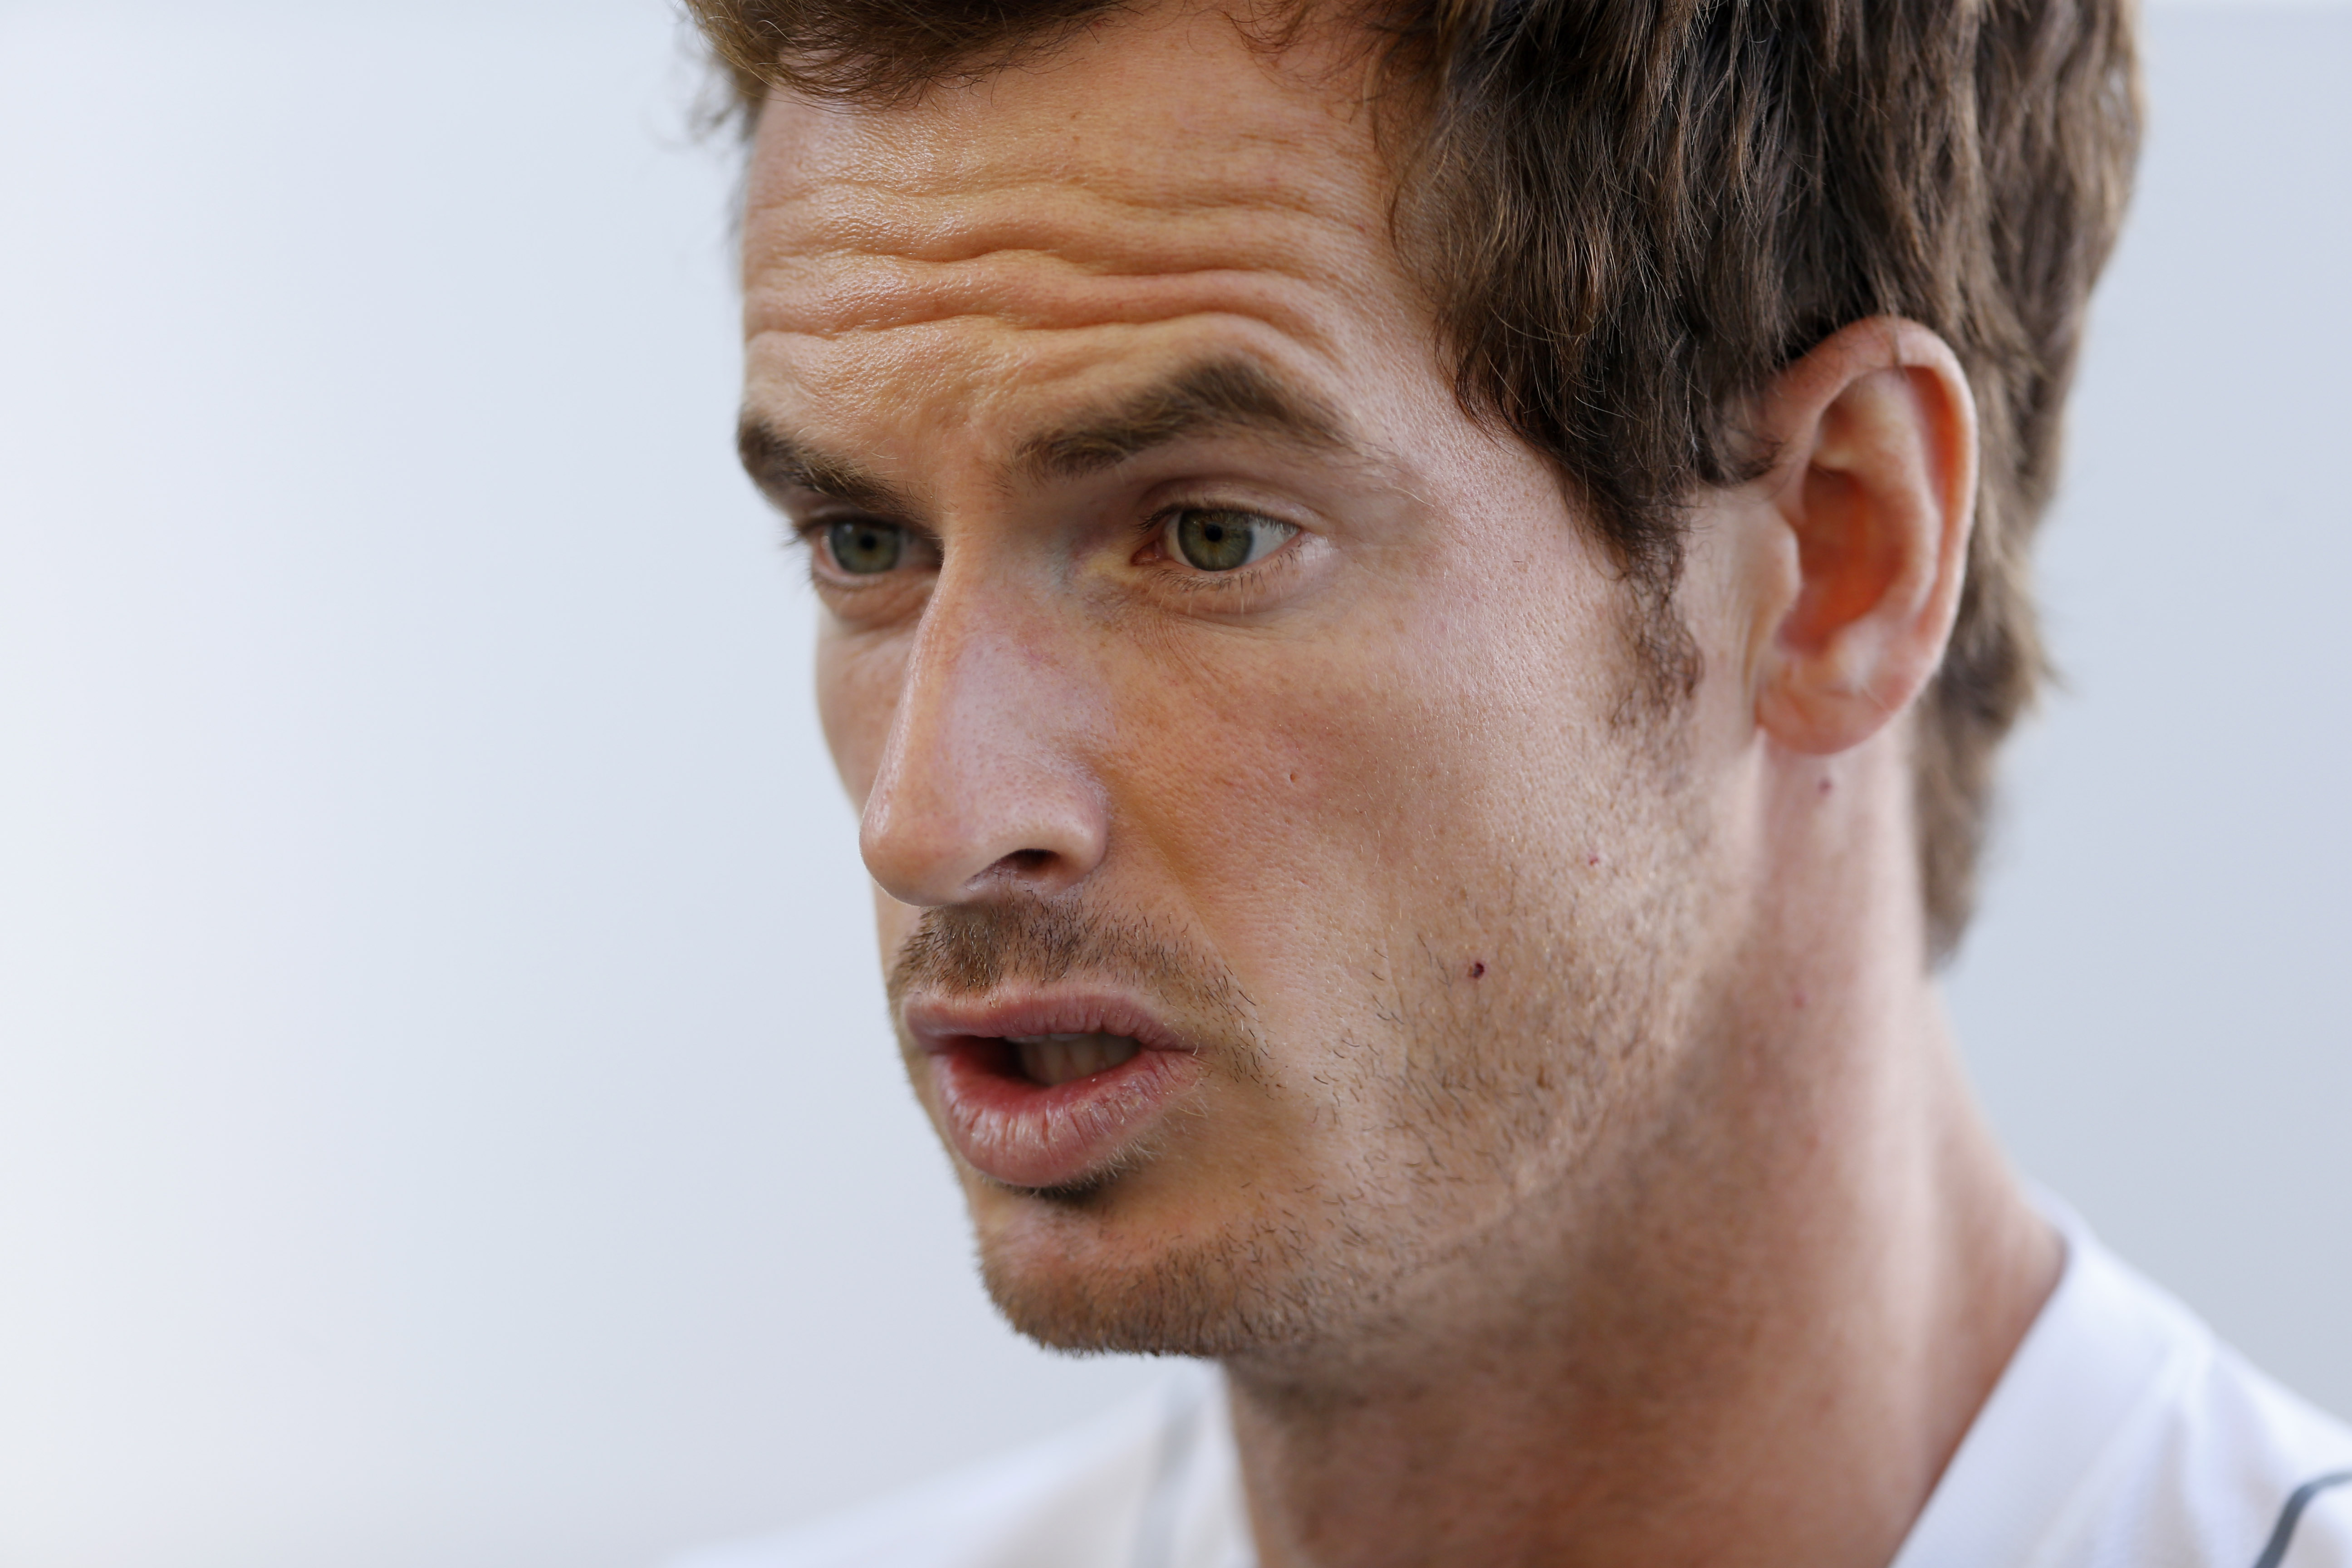 Tennis: Fitness and passion key for Andy Murray's career ambitions